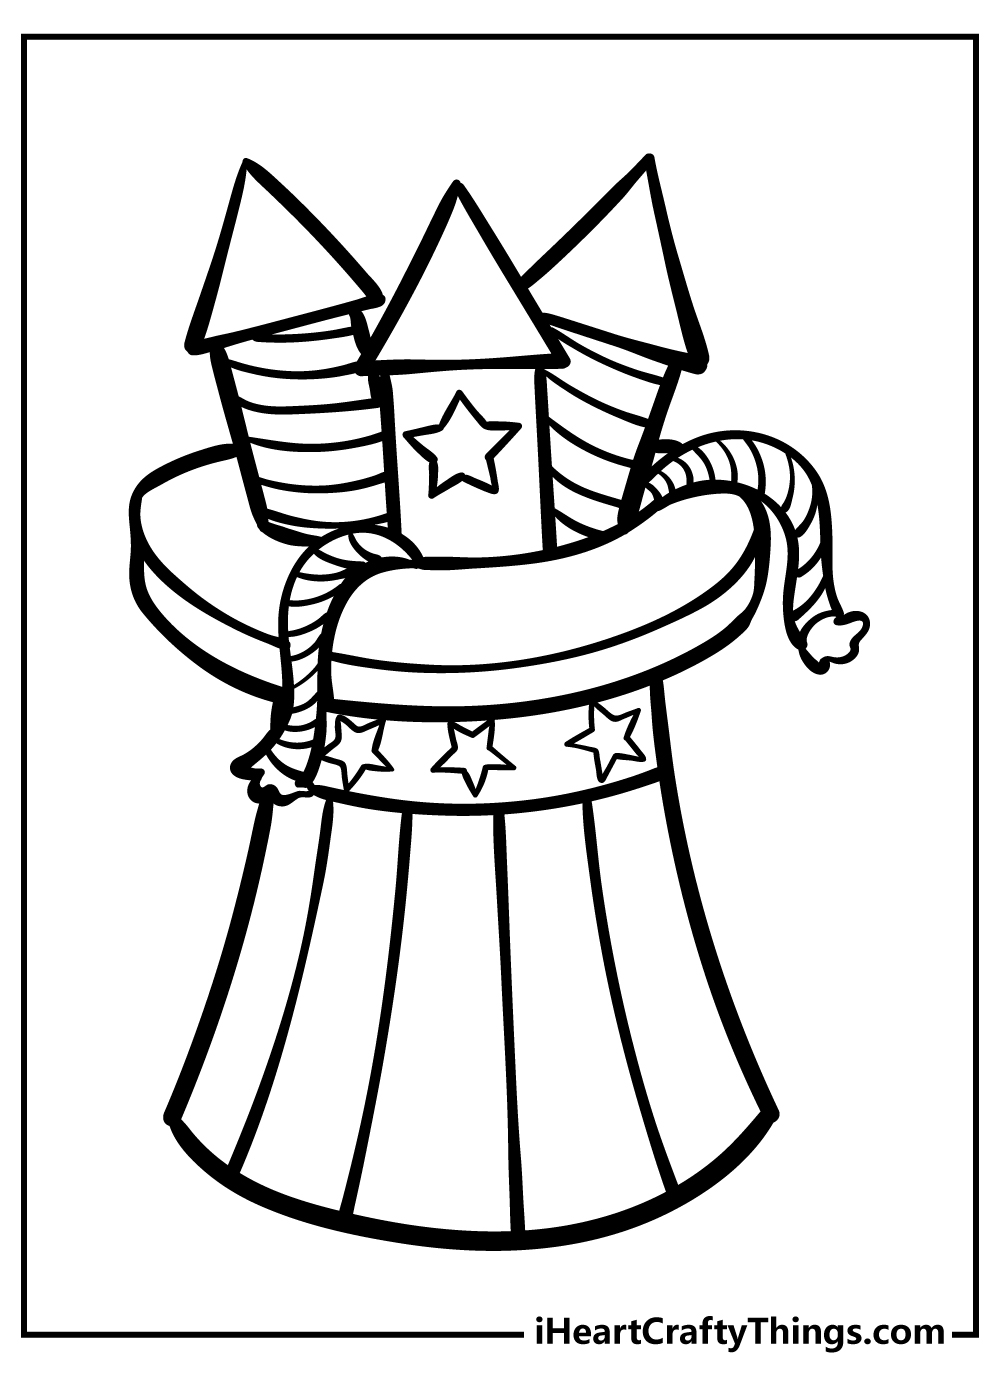 Celebrate Freedom with 4th of July: 180+ Free Coloring Pages 101